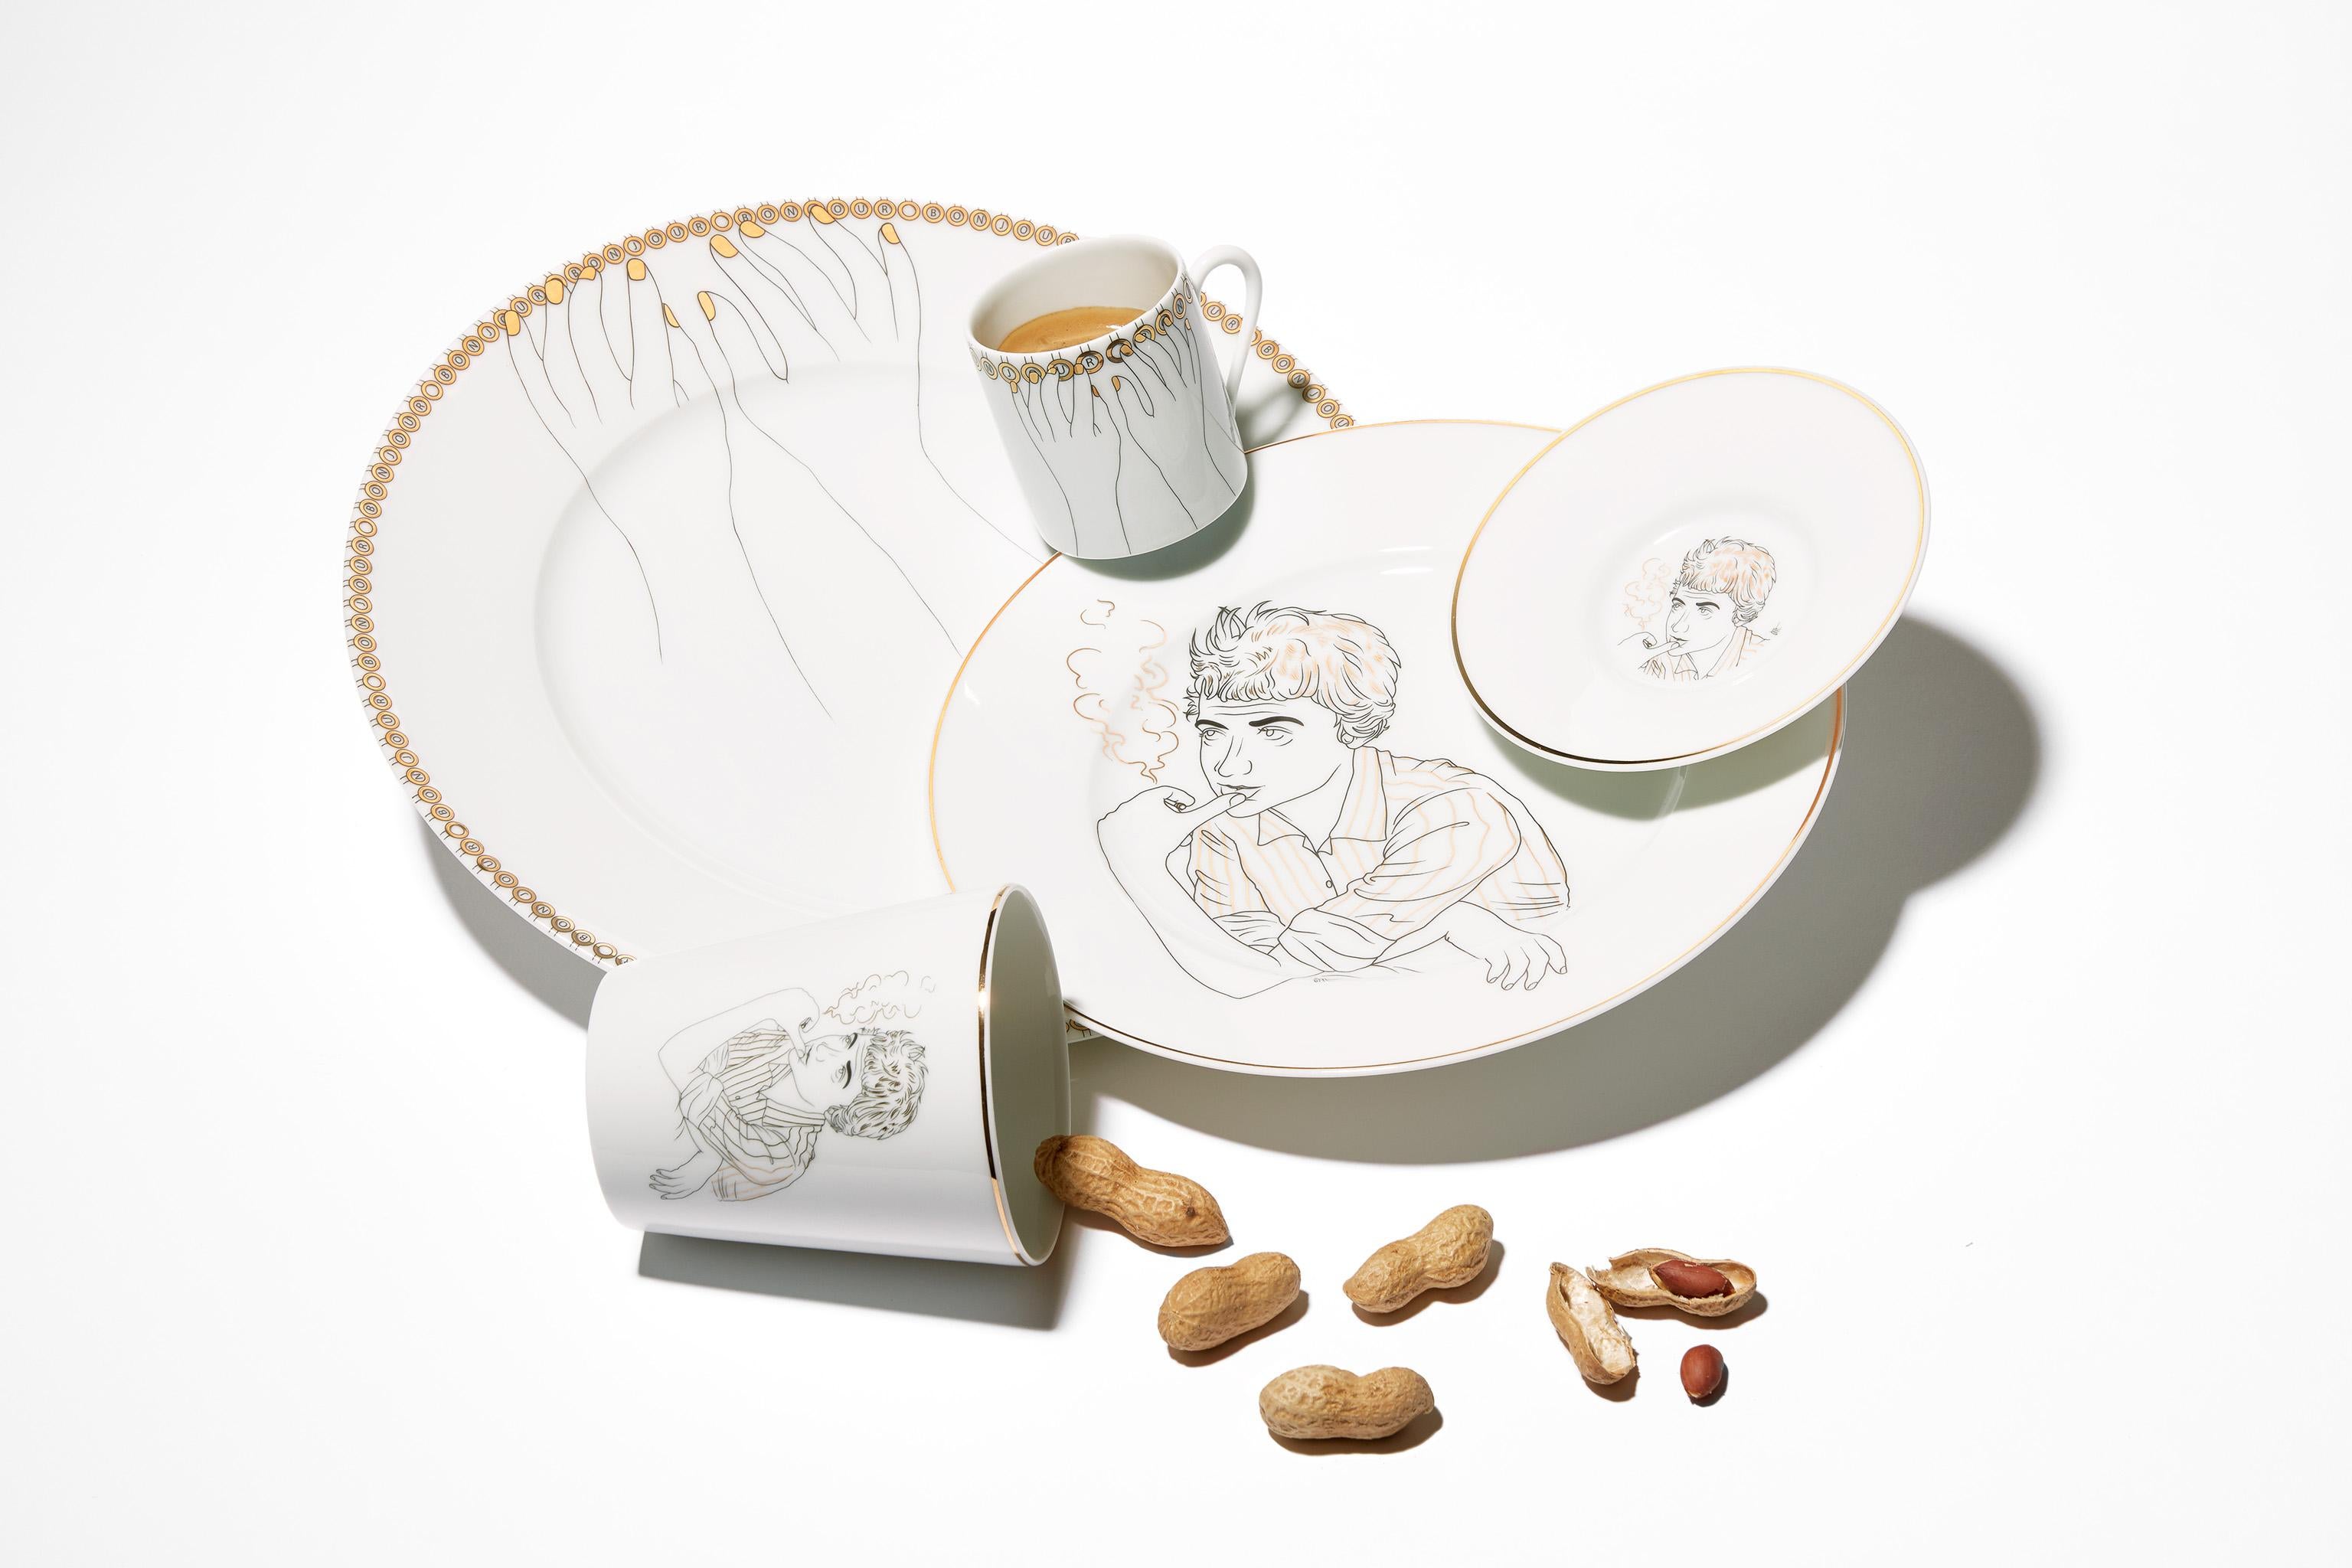 Maison Fragile and the Parisian illustrator artist Jean-Michel Tixier have joined together to create a collection that pays tribute to key figures, who have made Paris as we know it.

Porcelaine of Limoges extra fine.
Serigraphy gold.
Gold filet